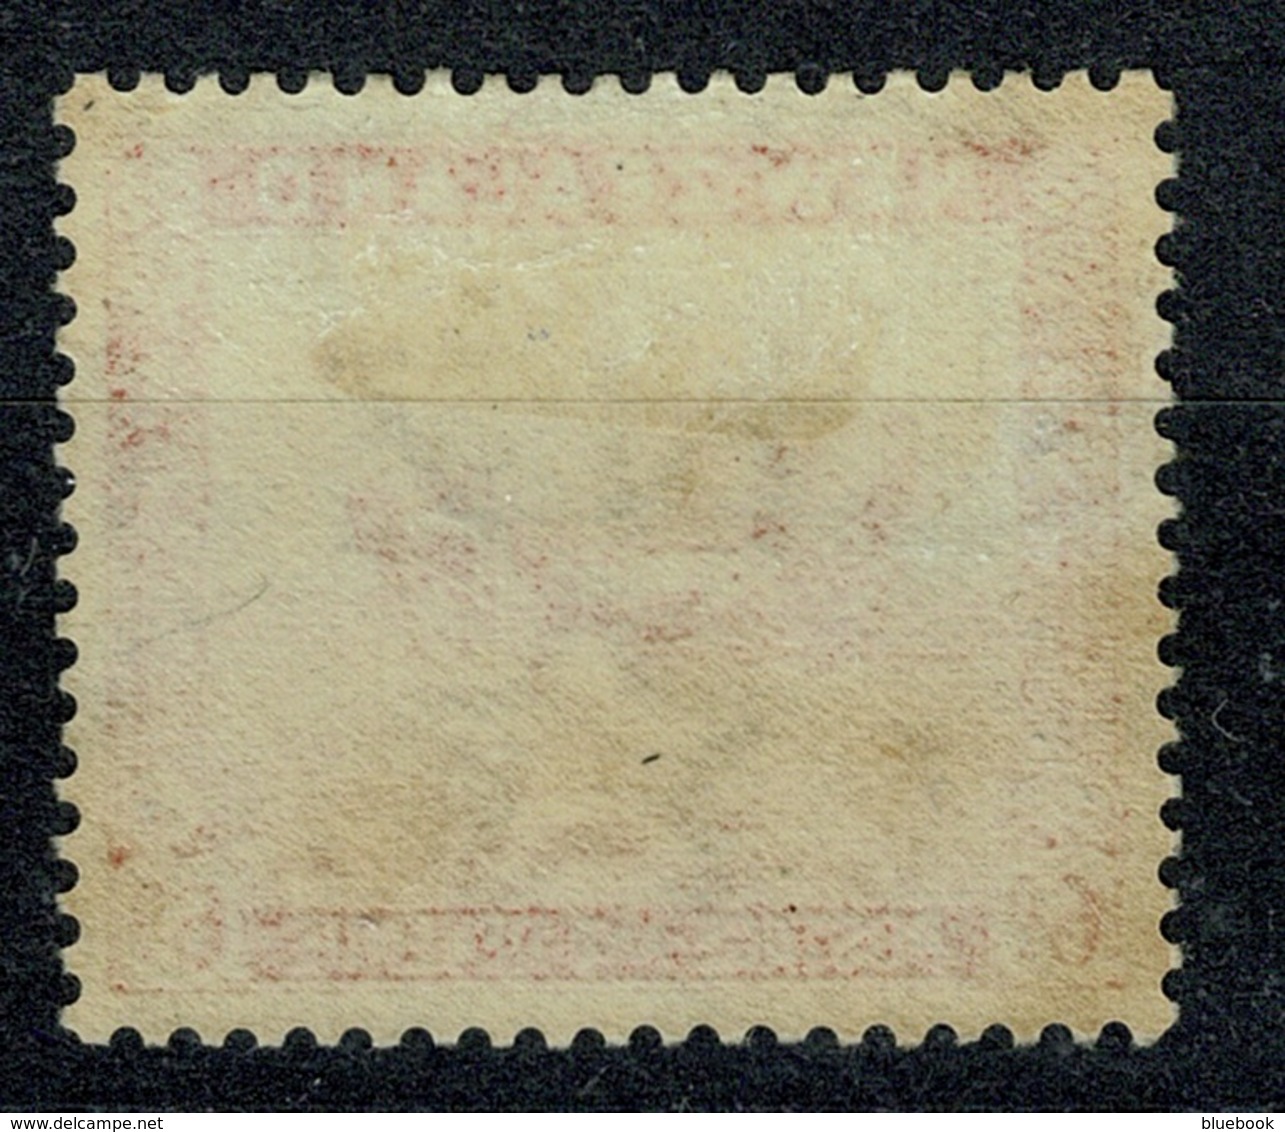 Ref 1234 - 1936 New Zealand 6d KGV Mint Stamp - SG 585 Perf 13.5 X 14 Cat £23 - Unused Stamps